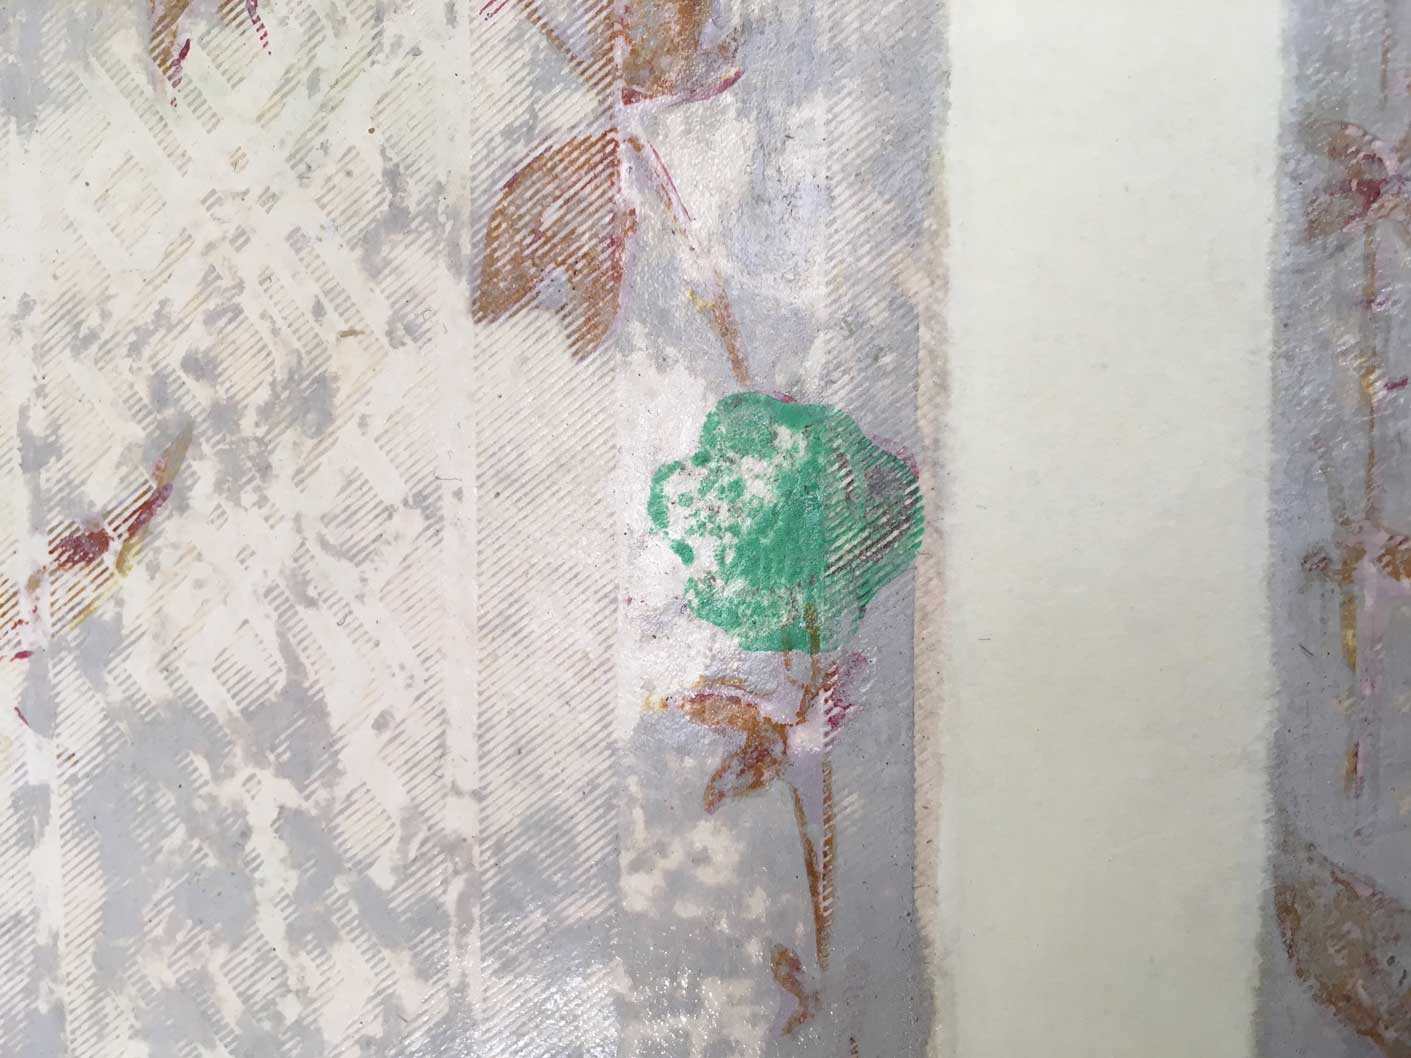 A historic wallpaper featuring geometric and floral patterns. The green pigment contains arsenic.